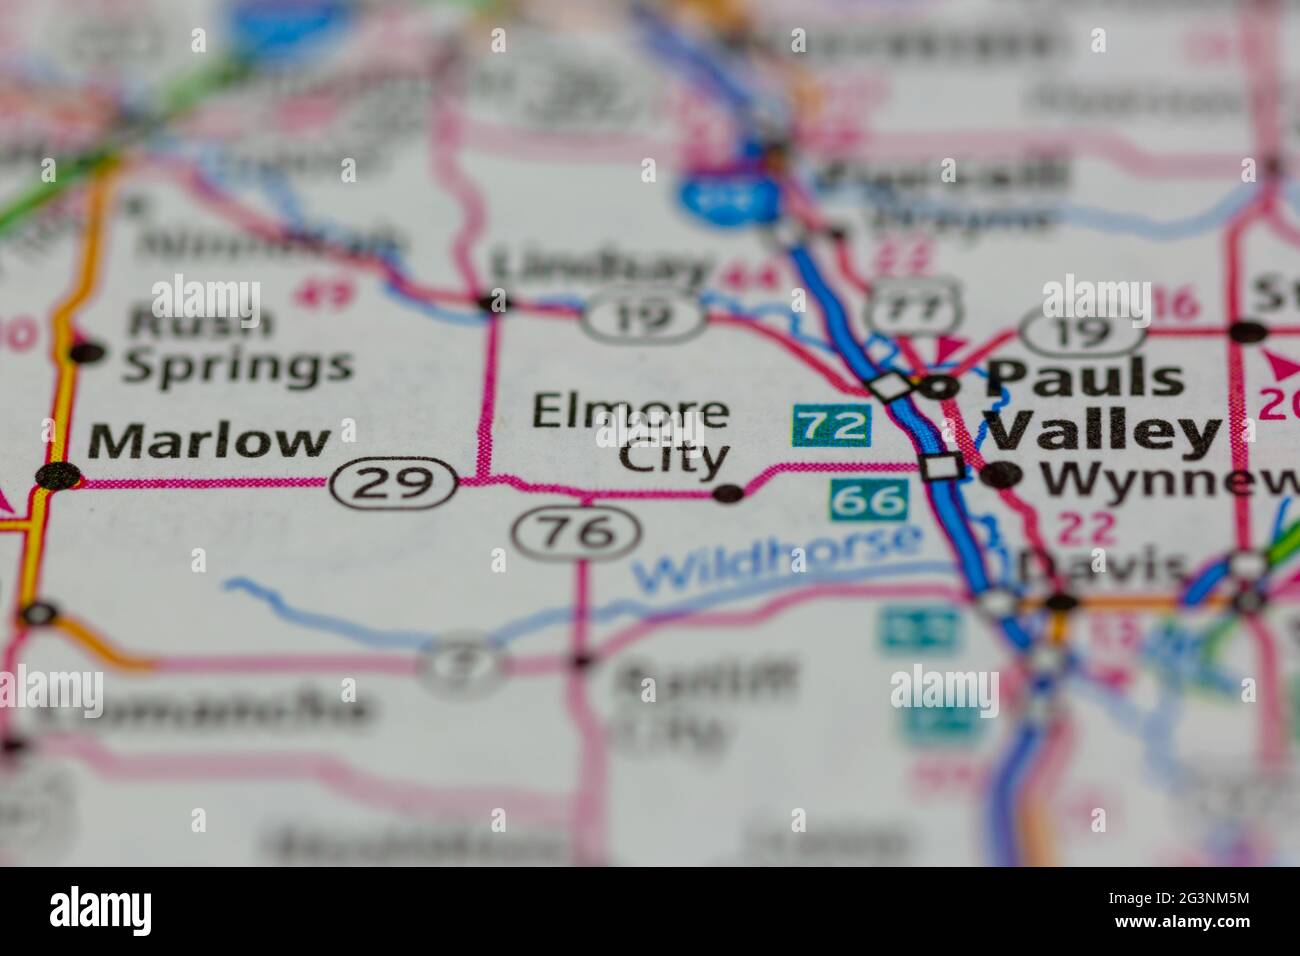 Elmore City Oklahoma USA shown on a Geography map or road map Stock Photo -  Alamy